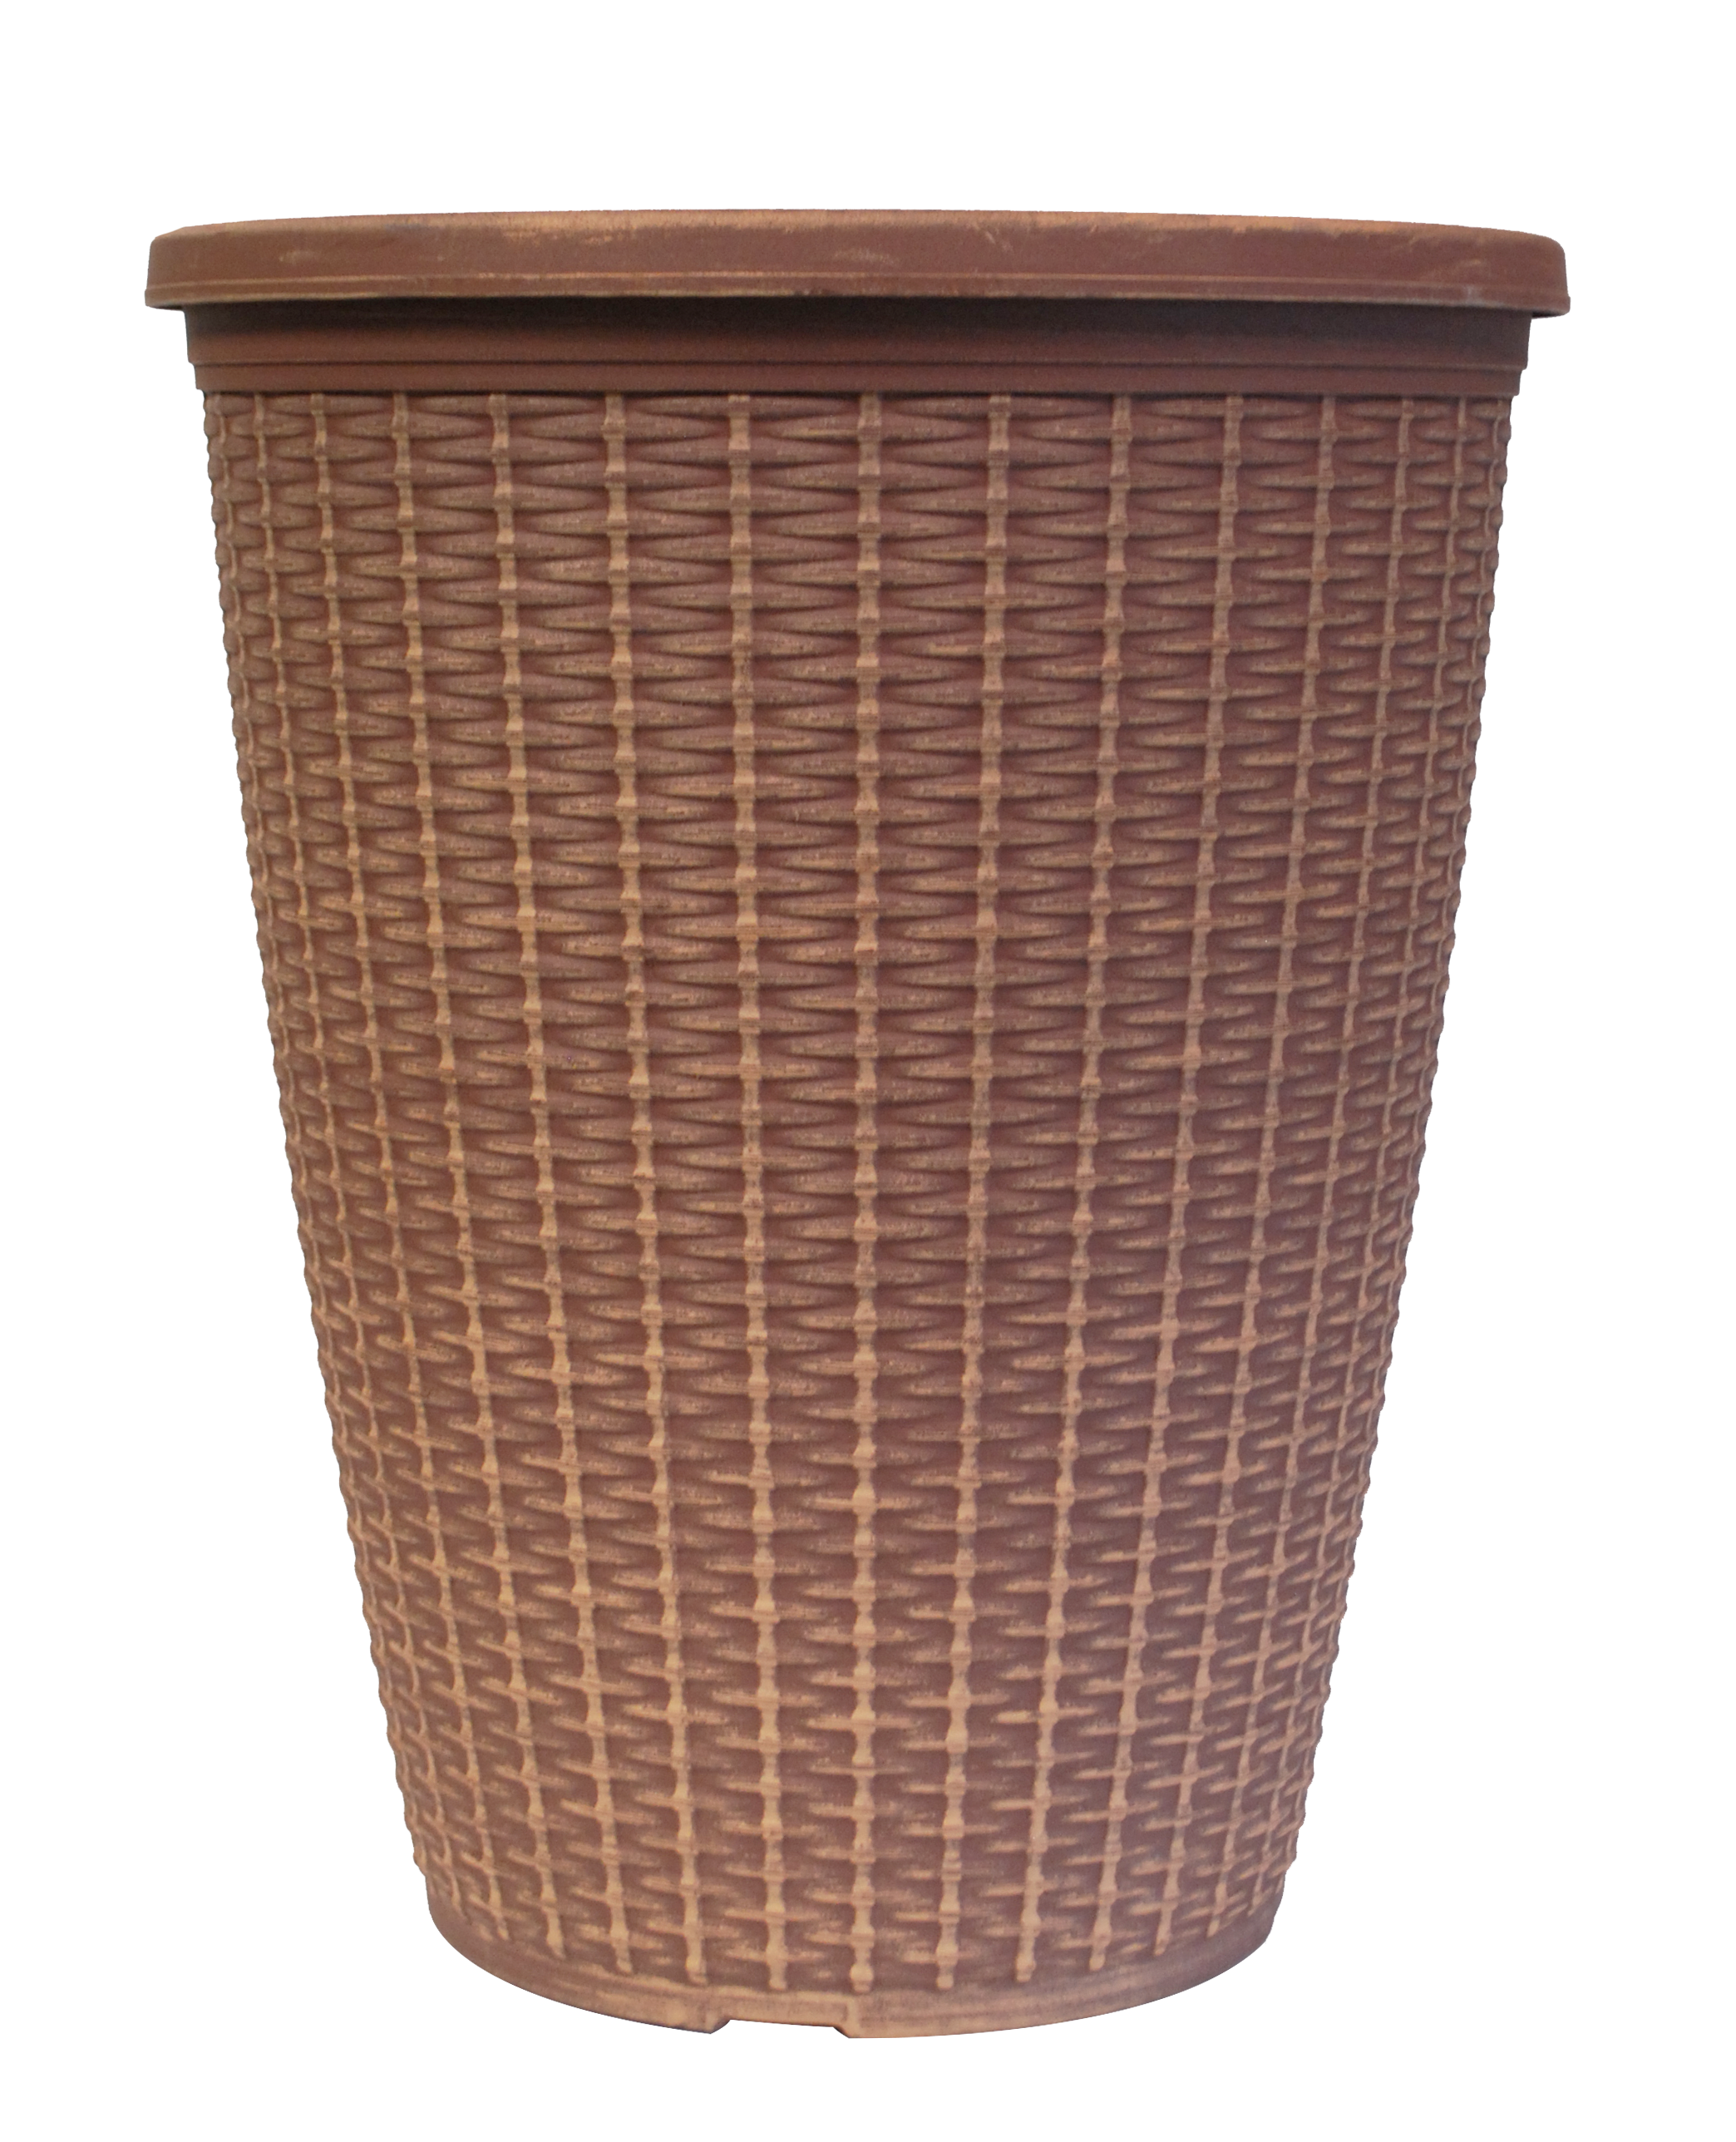 15 Wicker Tall Planter Carmel Wood - 10 per case - Containers